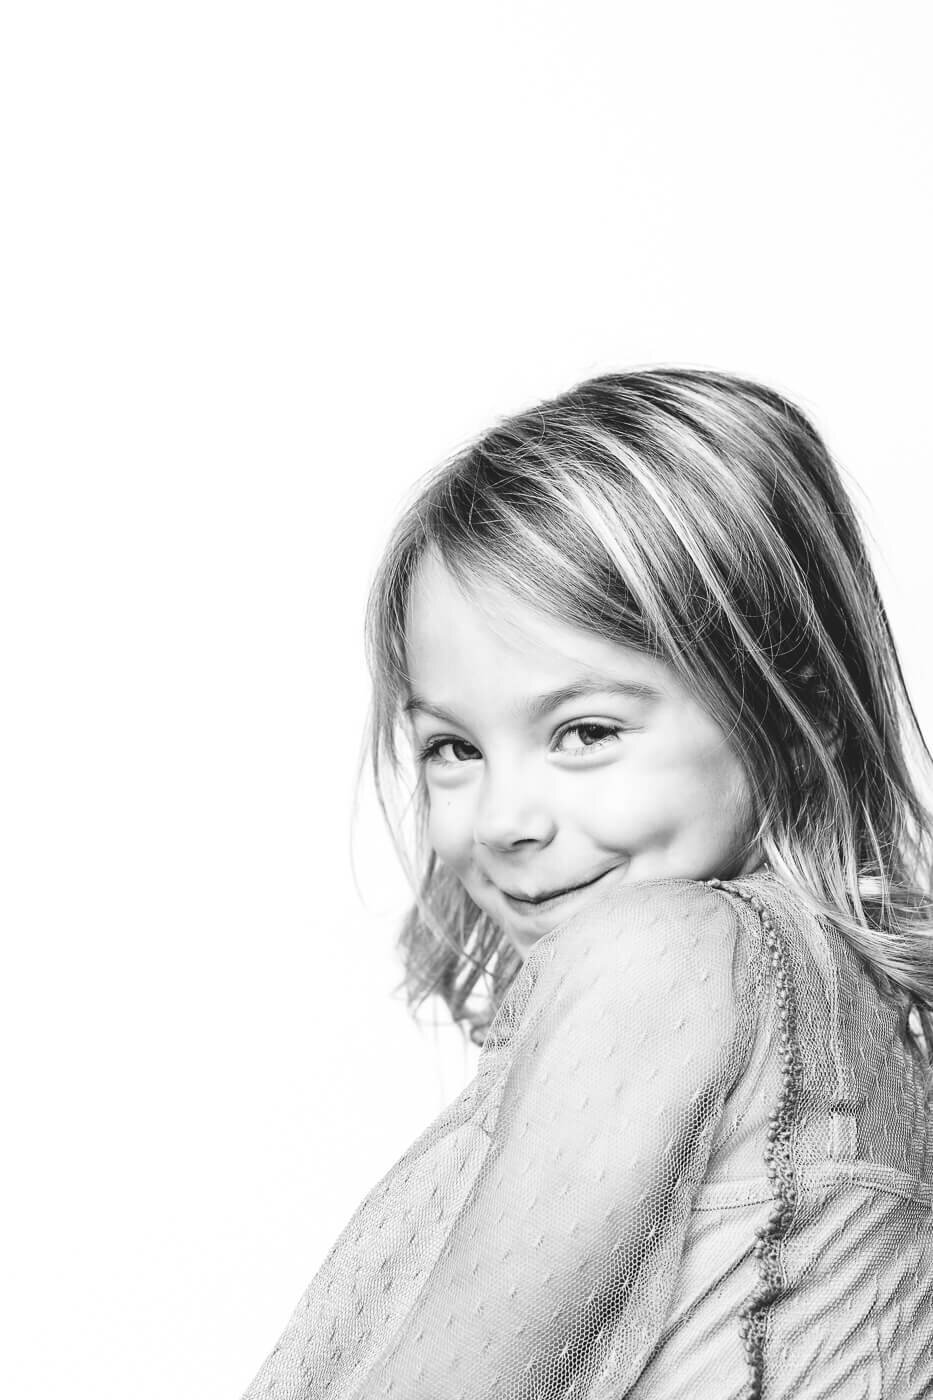 Young girl looking at Tampa photographer with a mischievous grin